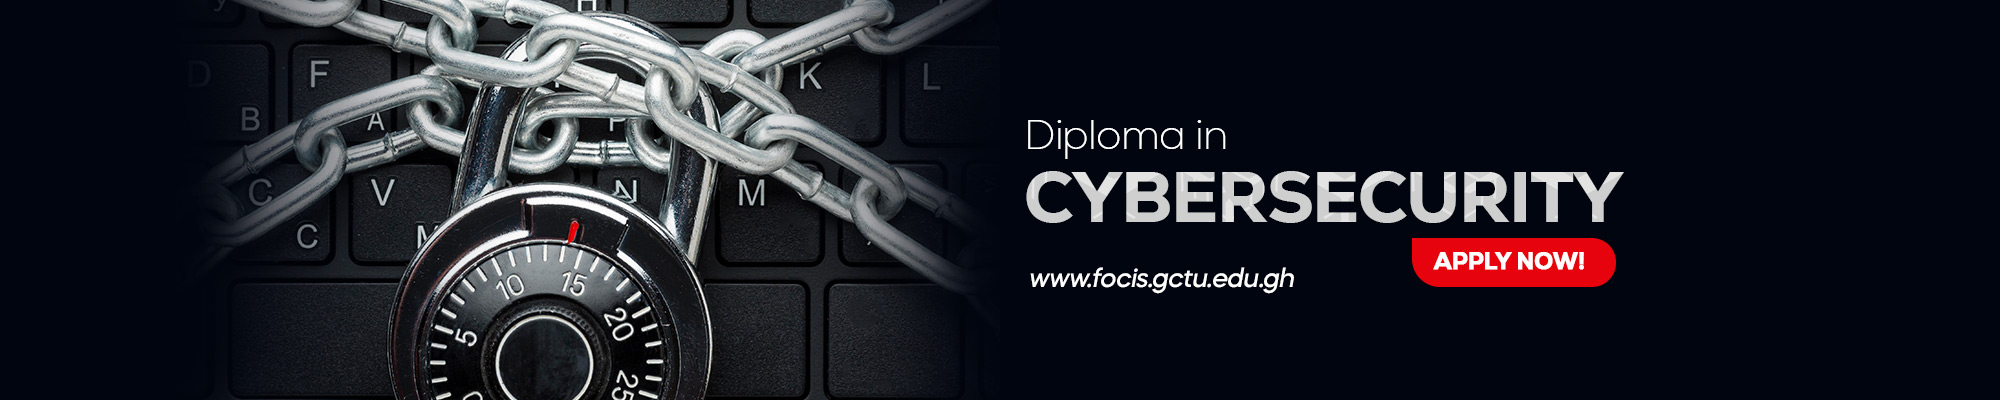 Diploma Cyber Security